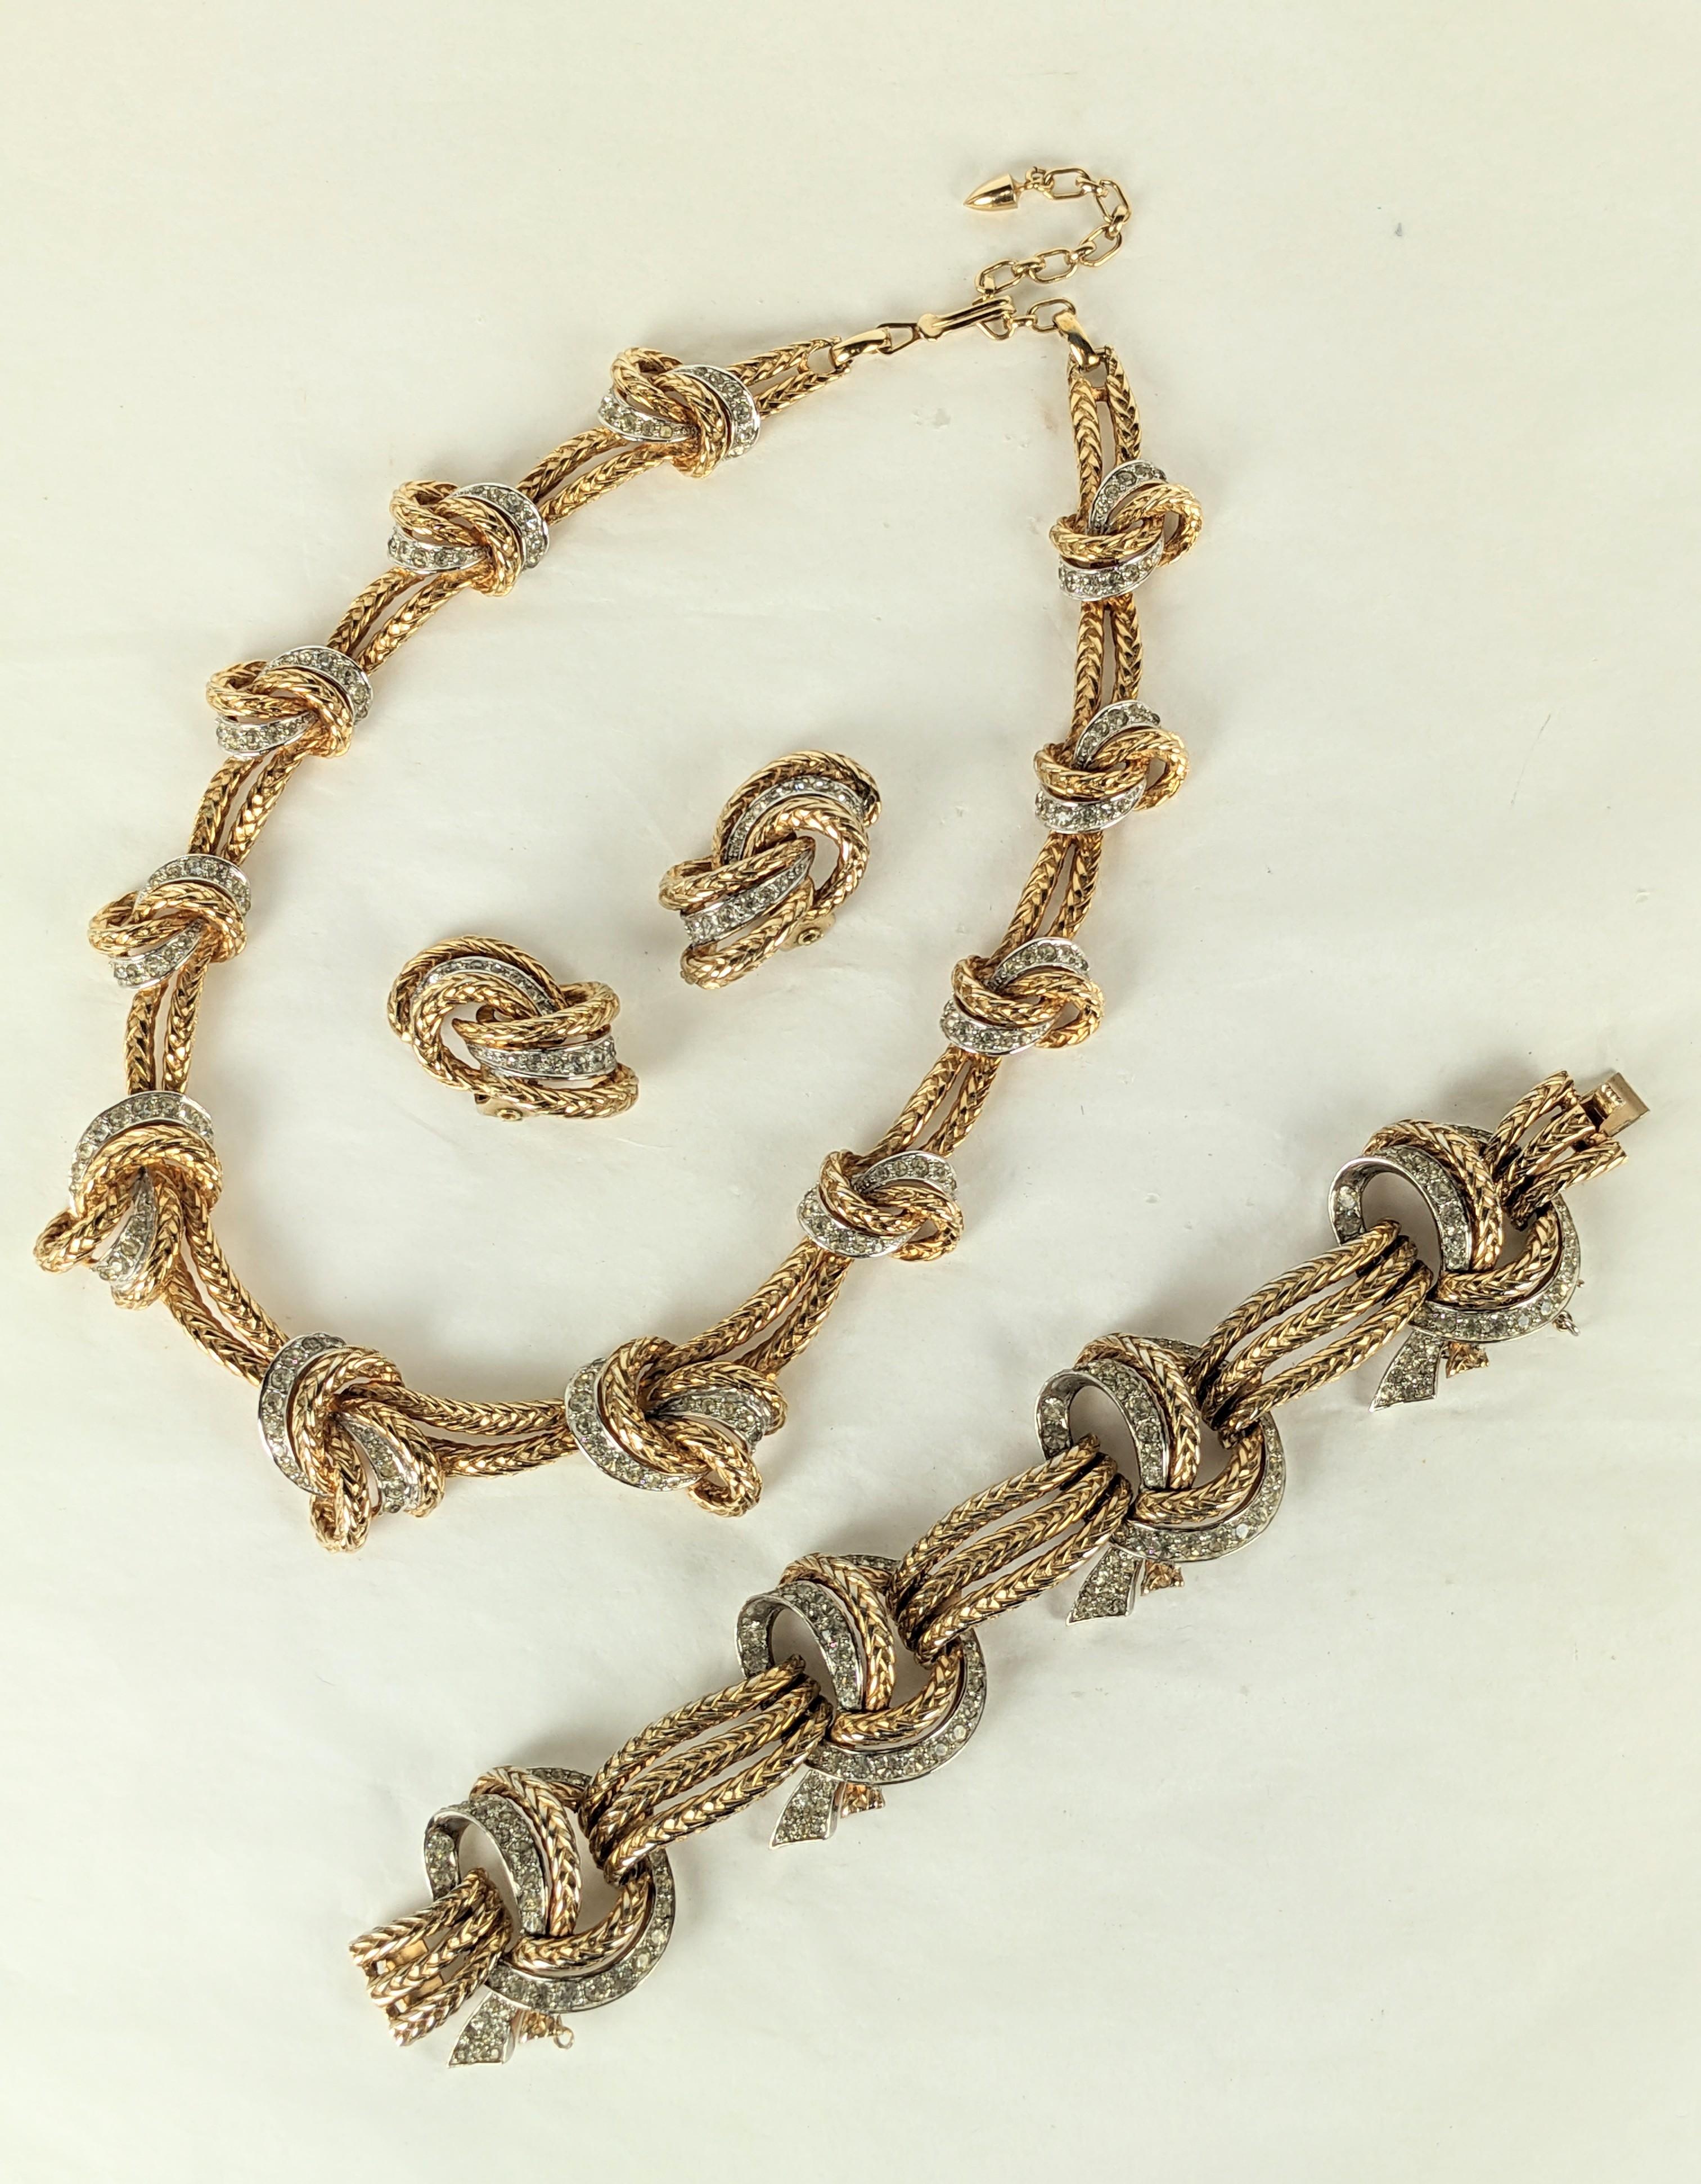 Elegant and Rare Marcel Boucher Gold and Pave Knot Suite from the 1950's. Graduated knot motifs in braided gilt metal with pave accents. Necklace, Bracelet and Earrings. 
Necklace Adjustable length. Fits 15